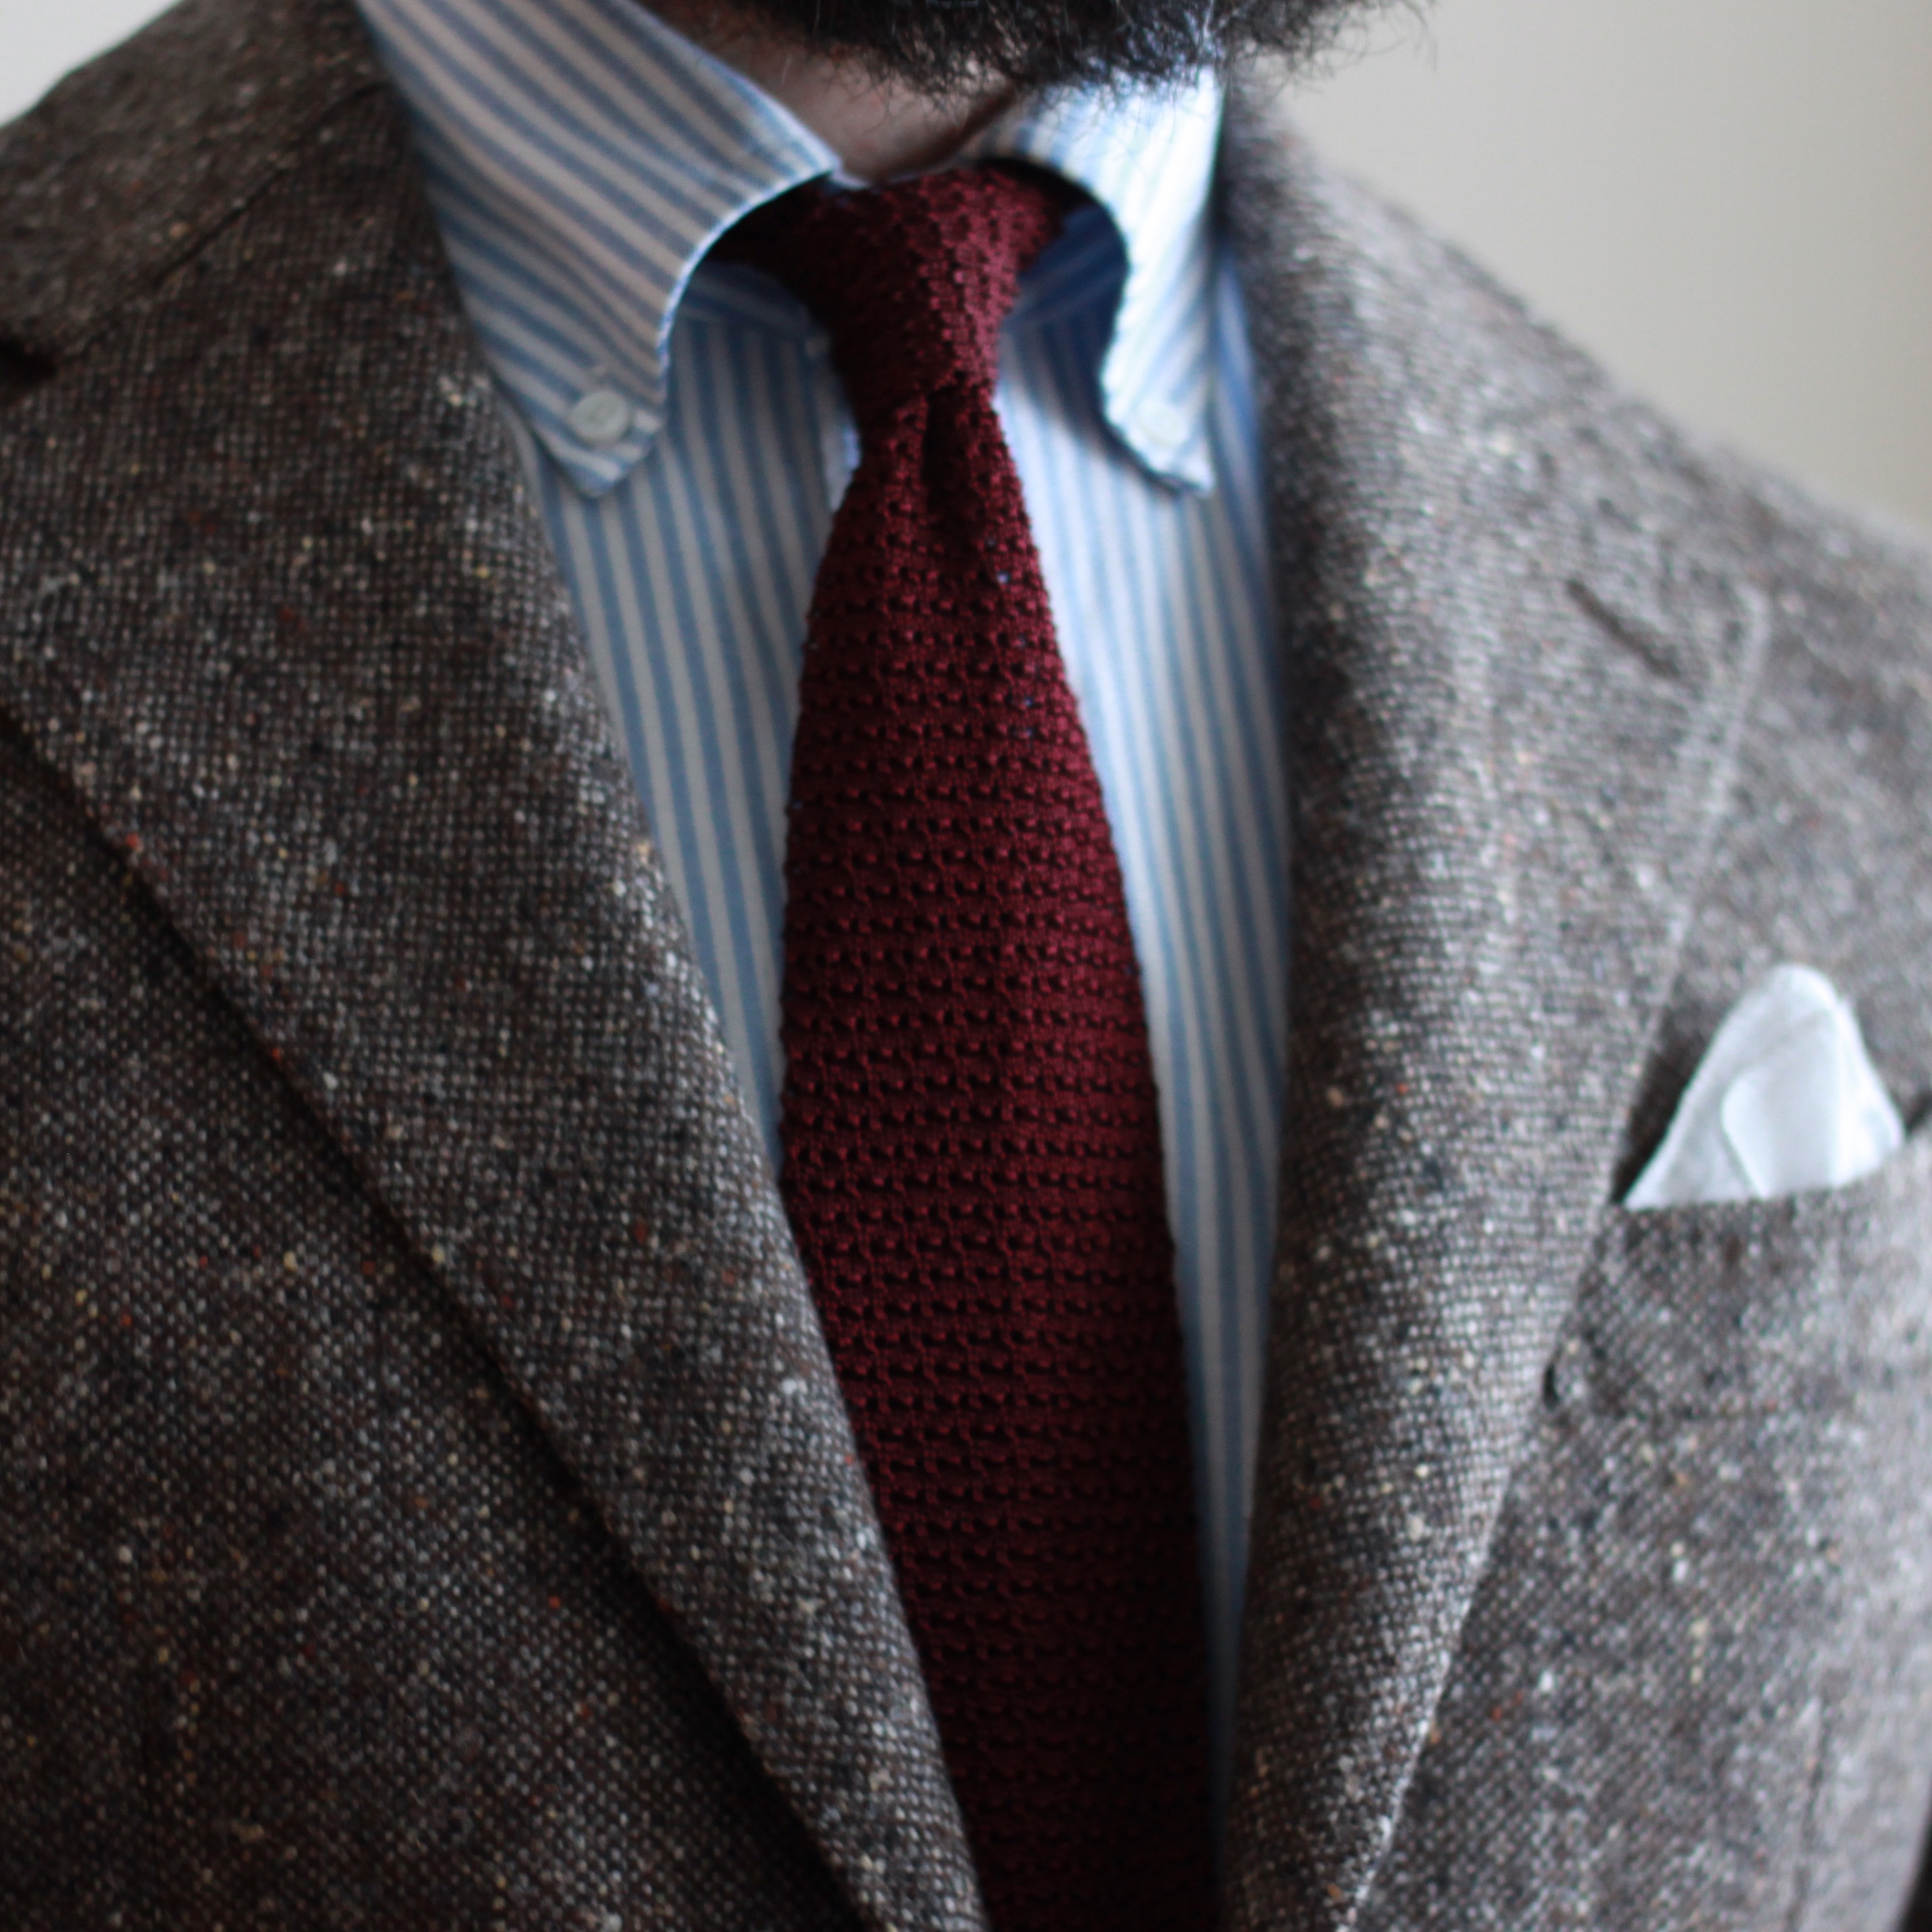 Reviewed: Oxford Rowe knit ties - After the Suit